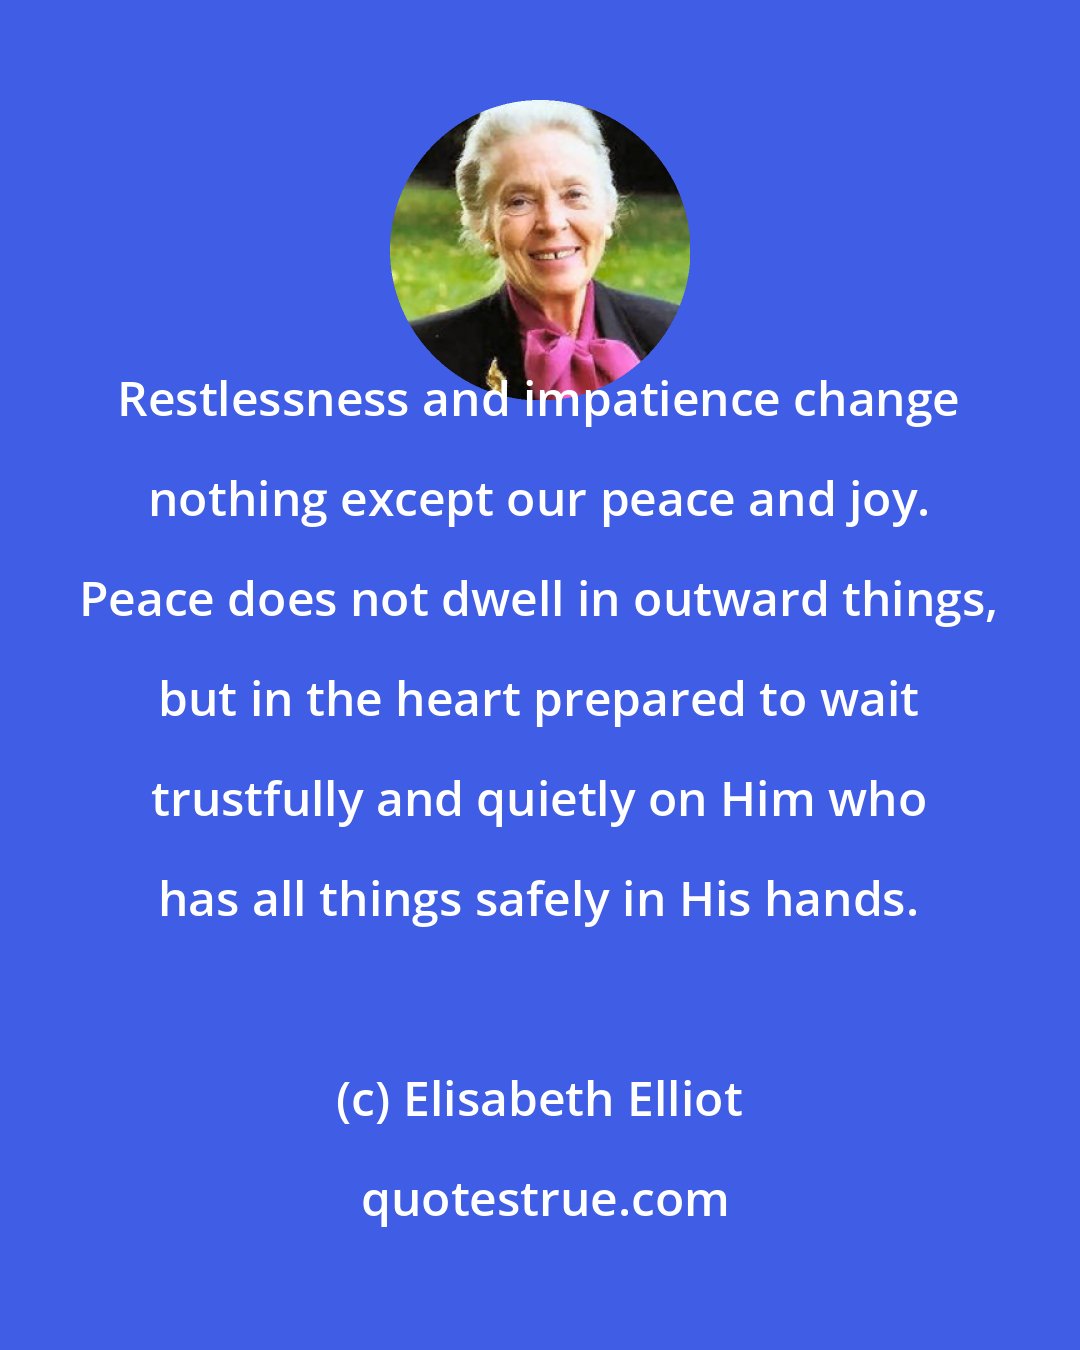 Elisabeth Elliot: Restlessness and impatience change nothing except our peace and joy. Peace does not dwell in outward things, but in the heart prepared to wait trustfully and quietly on Him who has all things safely in His hands.